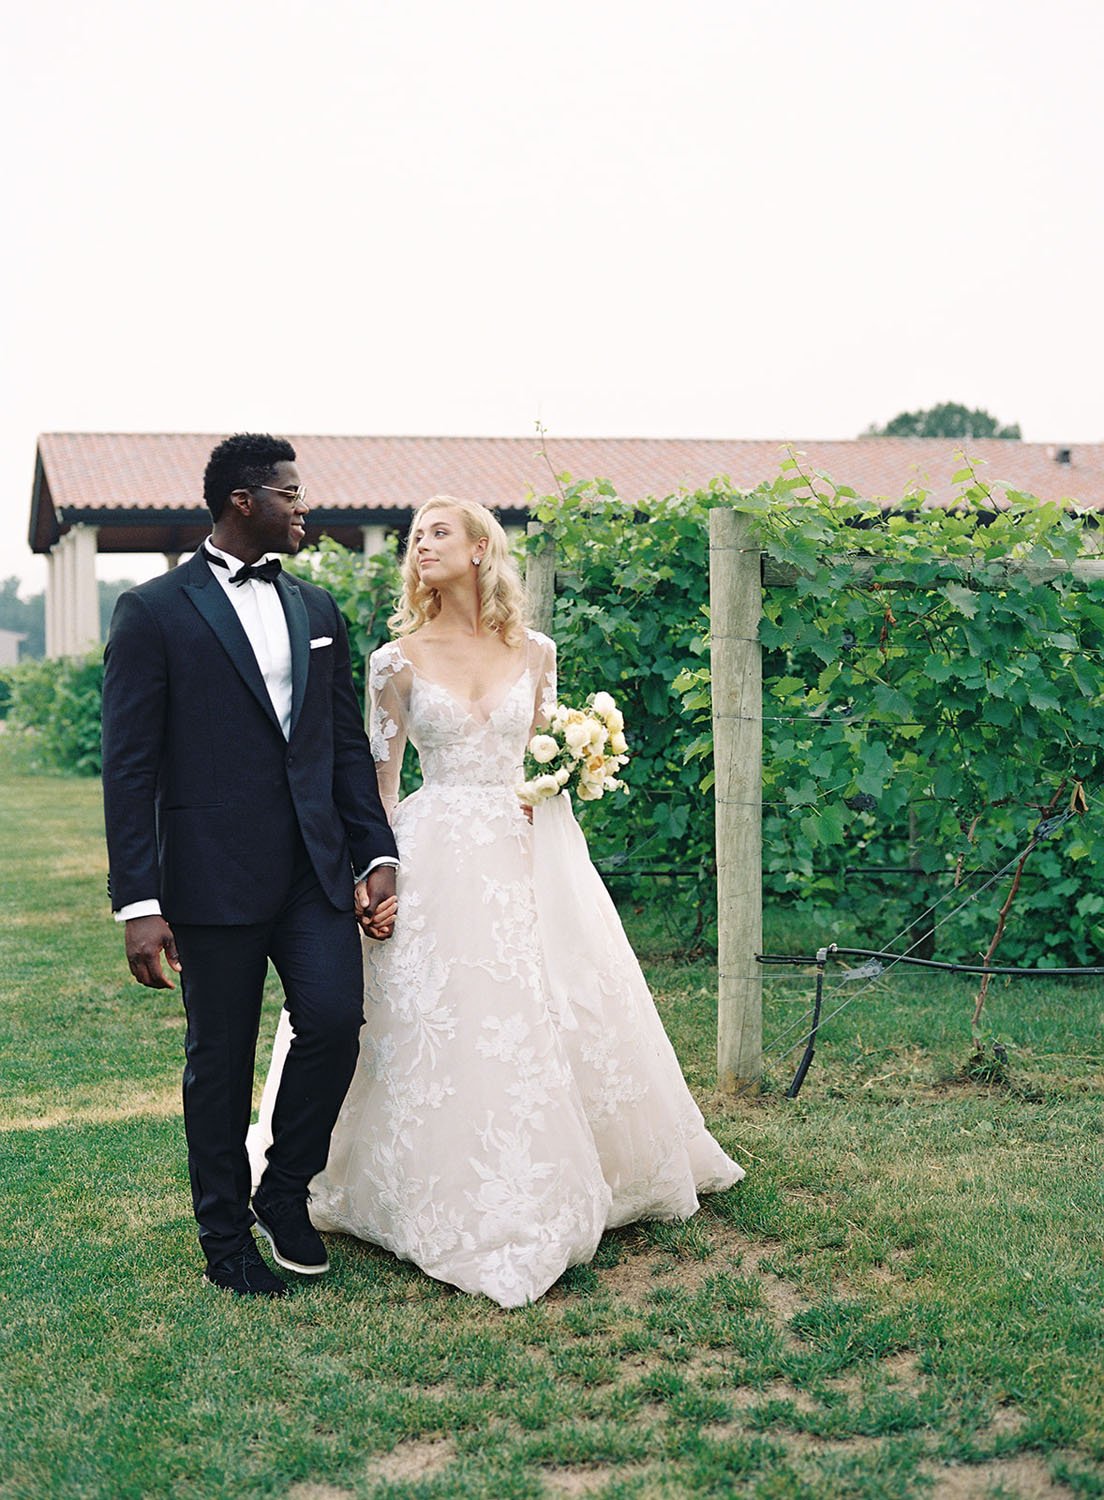  A bride and groom holding hands and walking through a vineyard garden for their spring midwest wedding. The bride is wearing 'Maeve' by Monique Lhuillier wedding gown. 